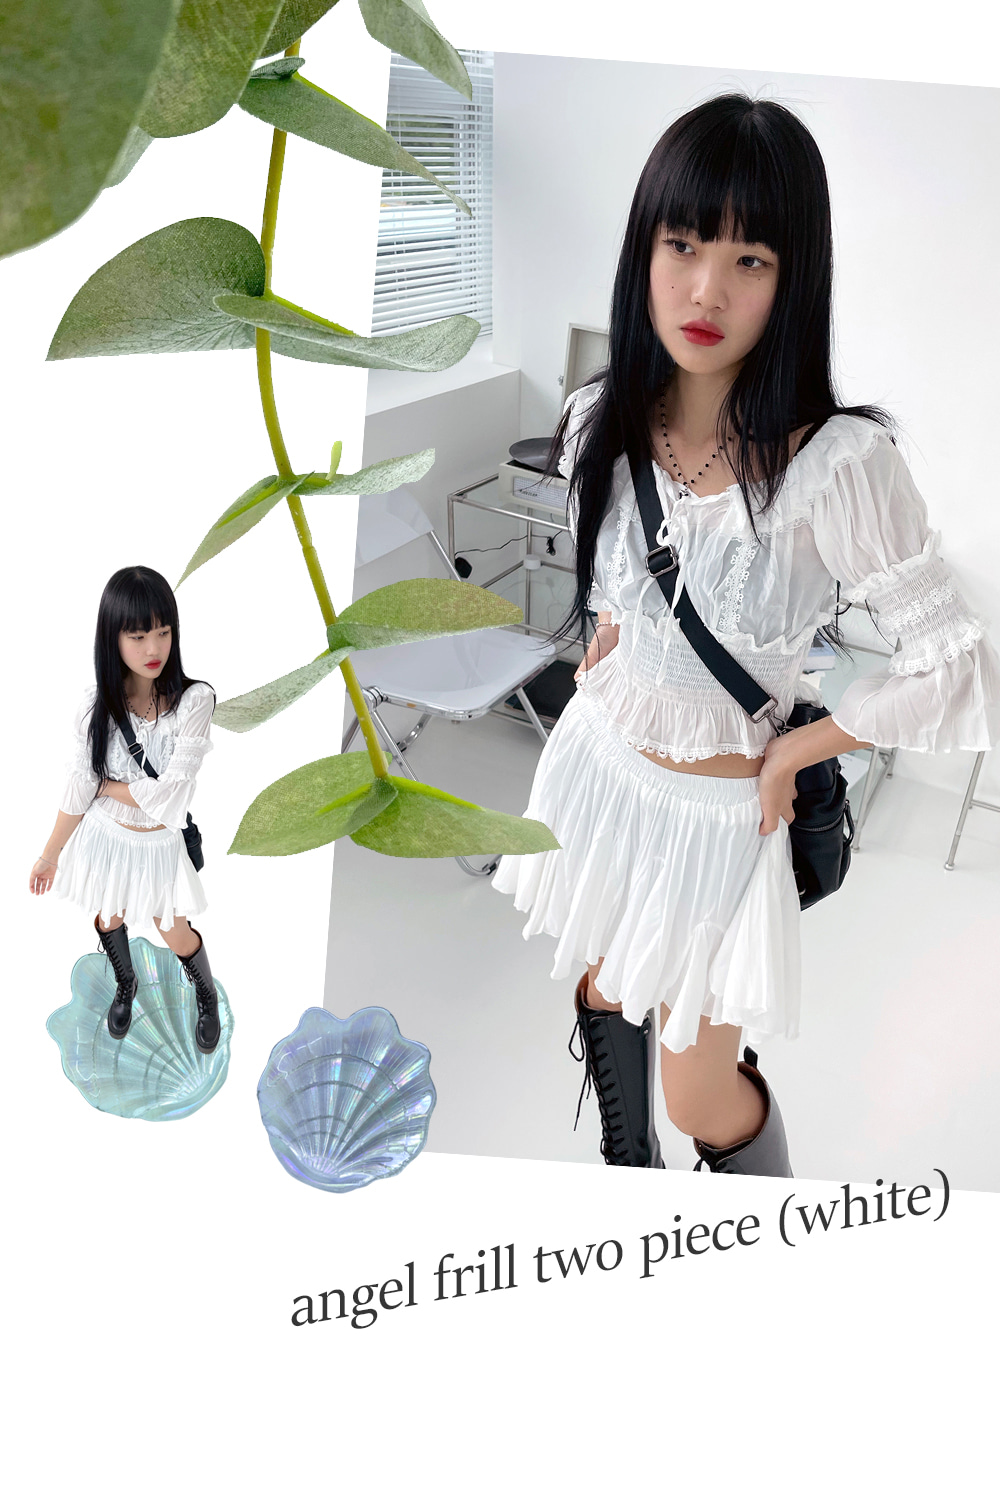 angel frill two piece (white)